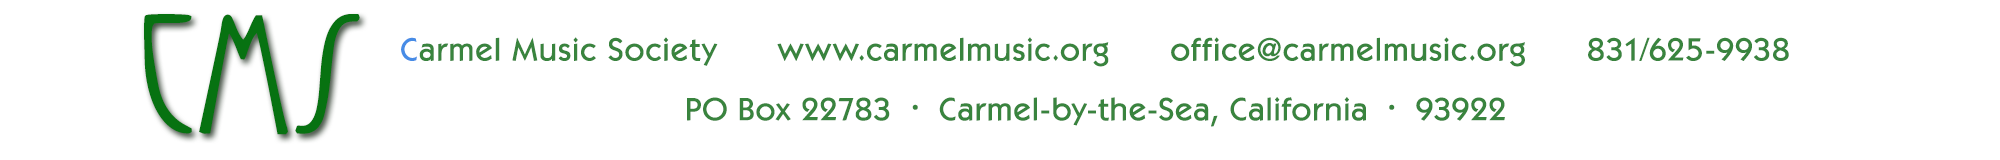 Our musical footer